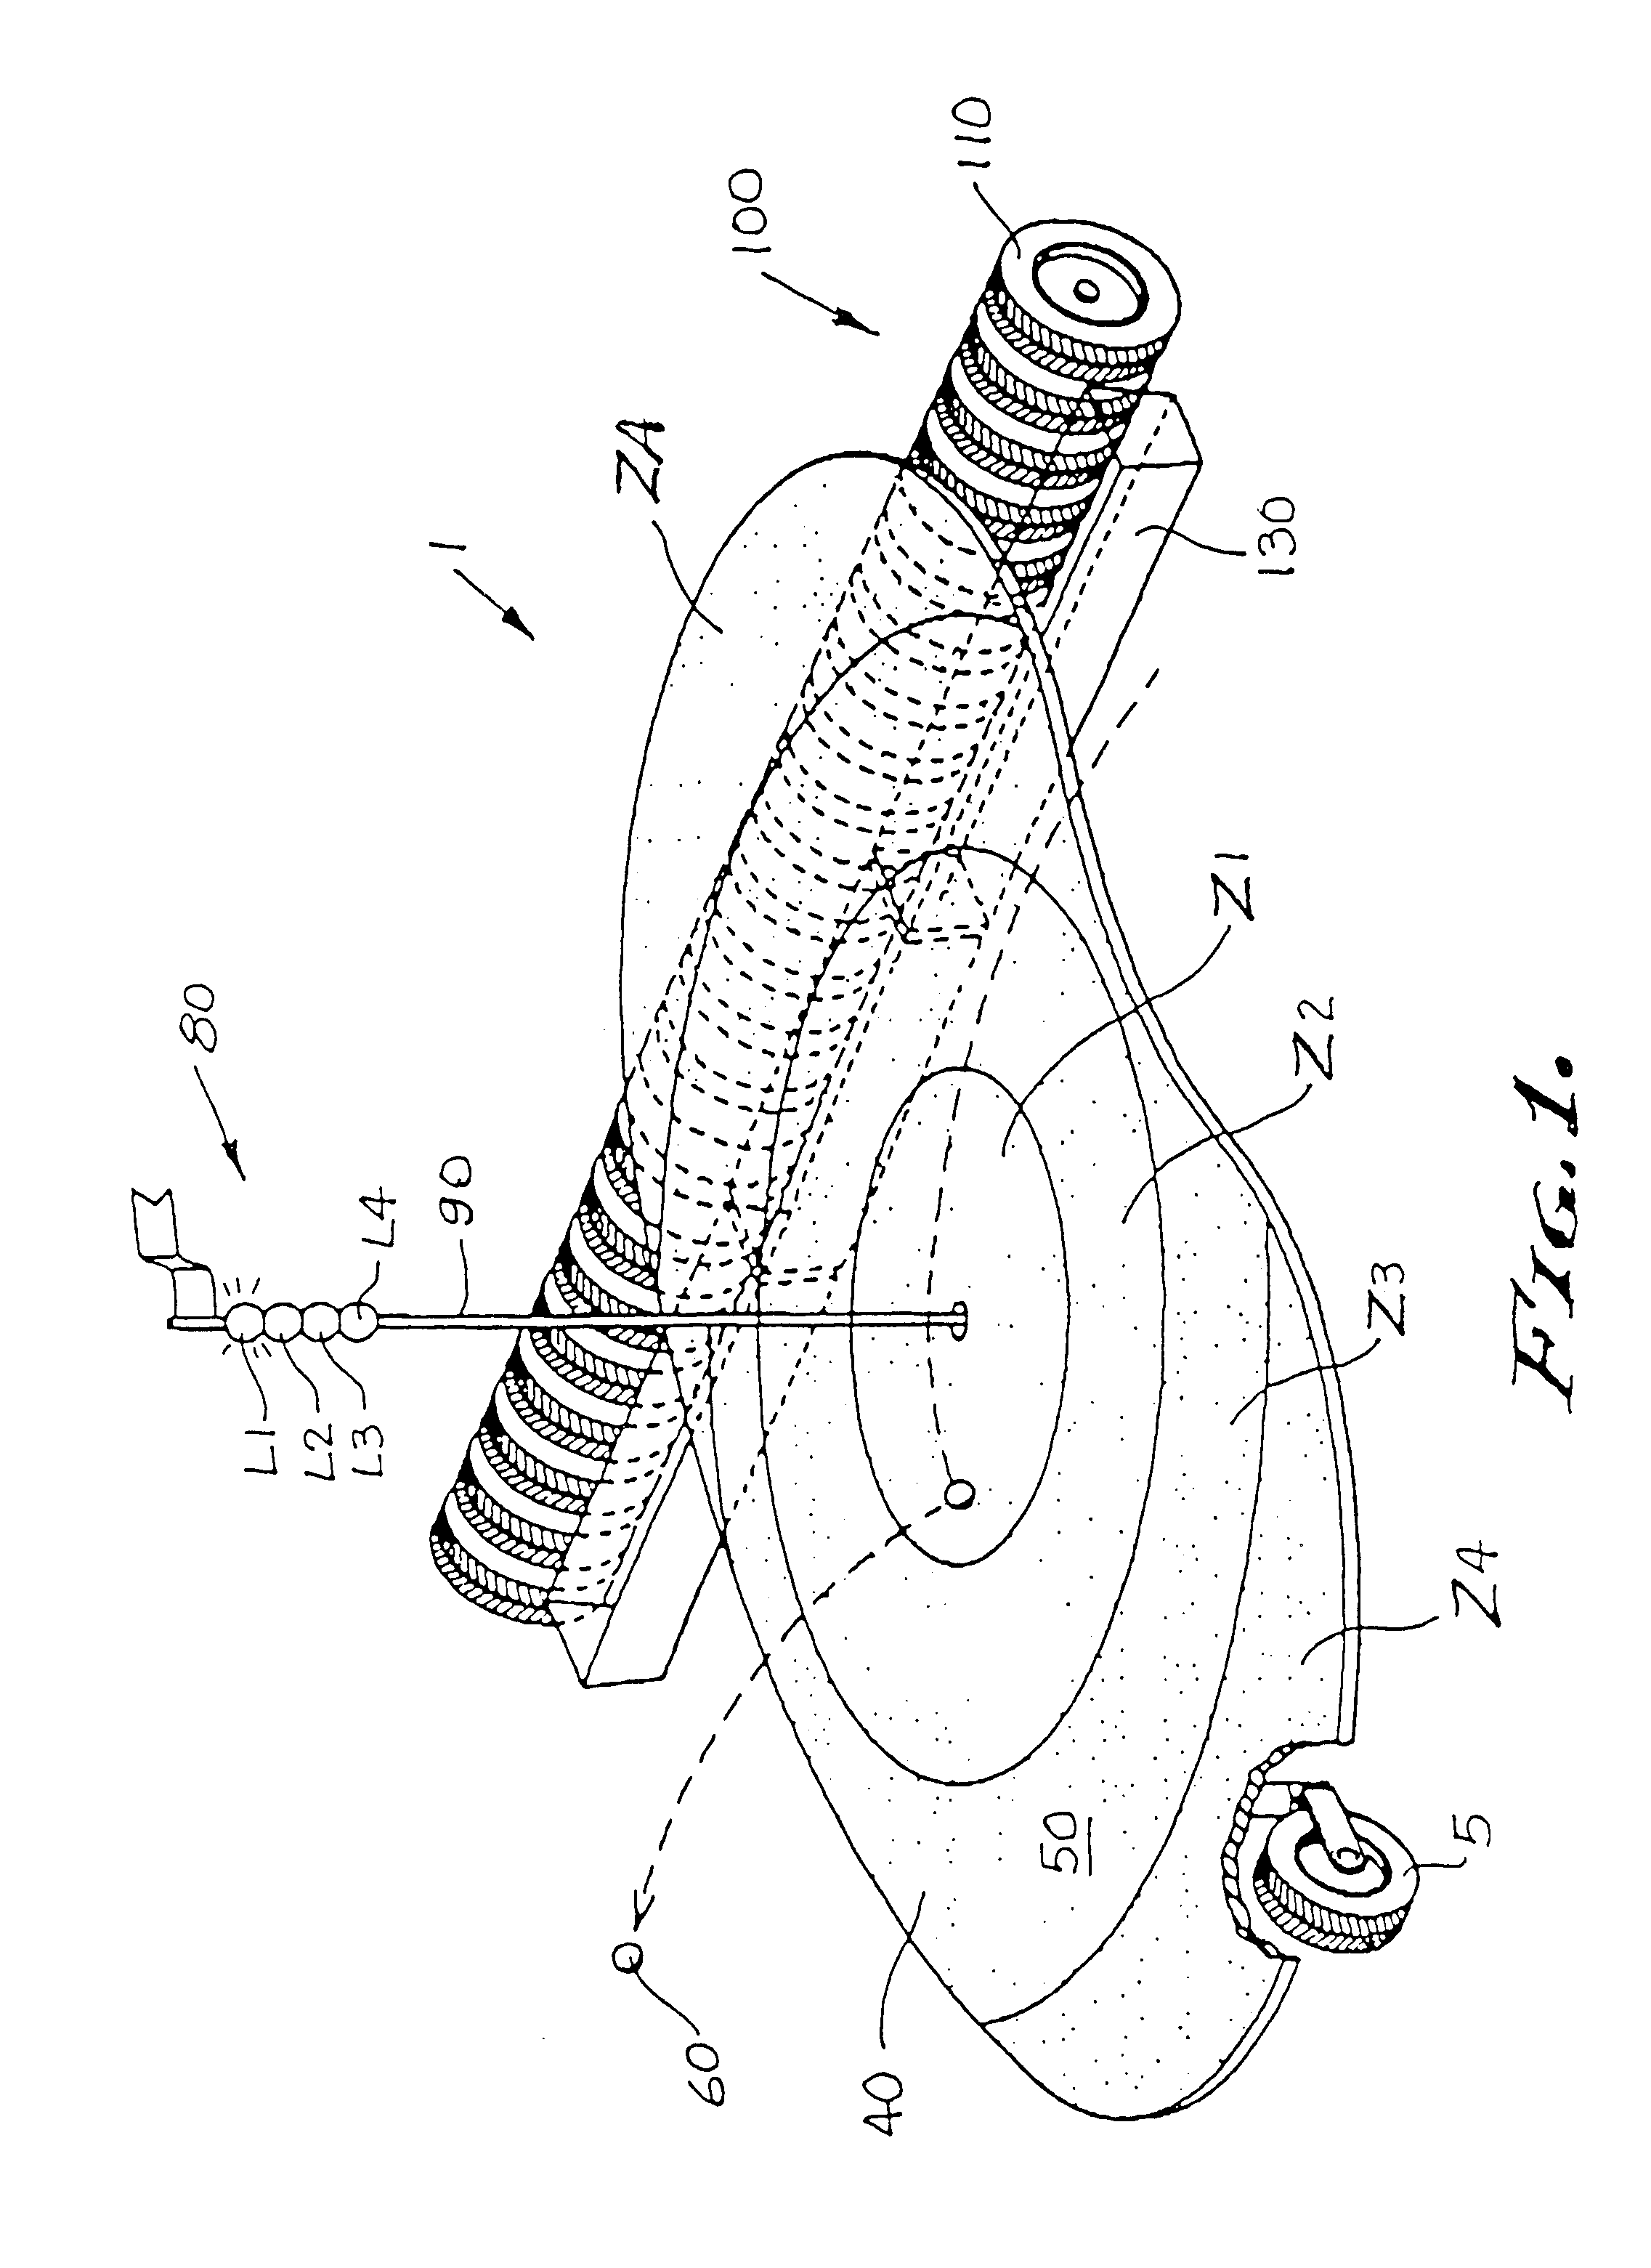 Moving practice green and ball pickup apparatus